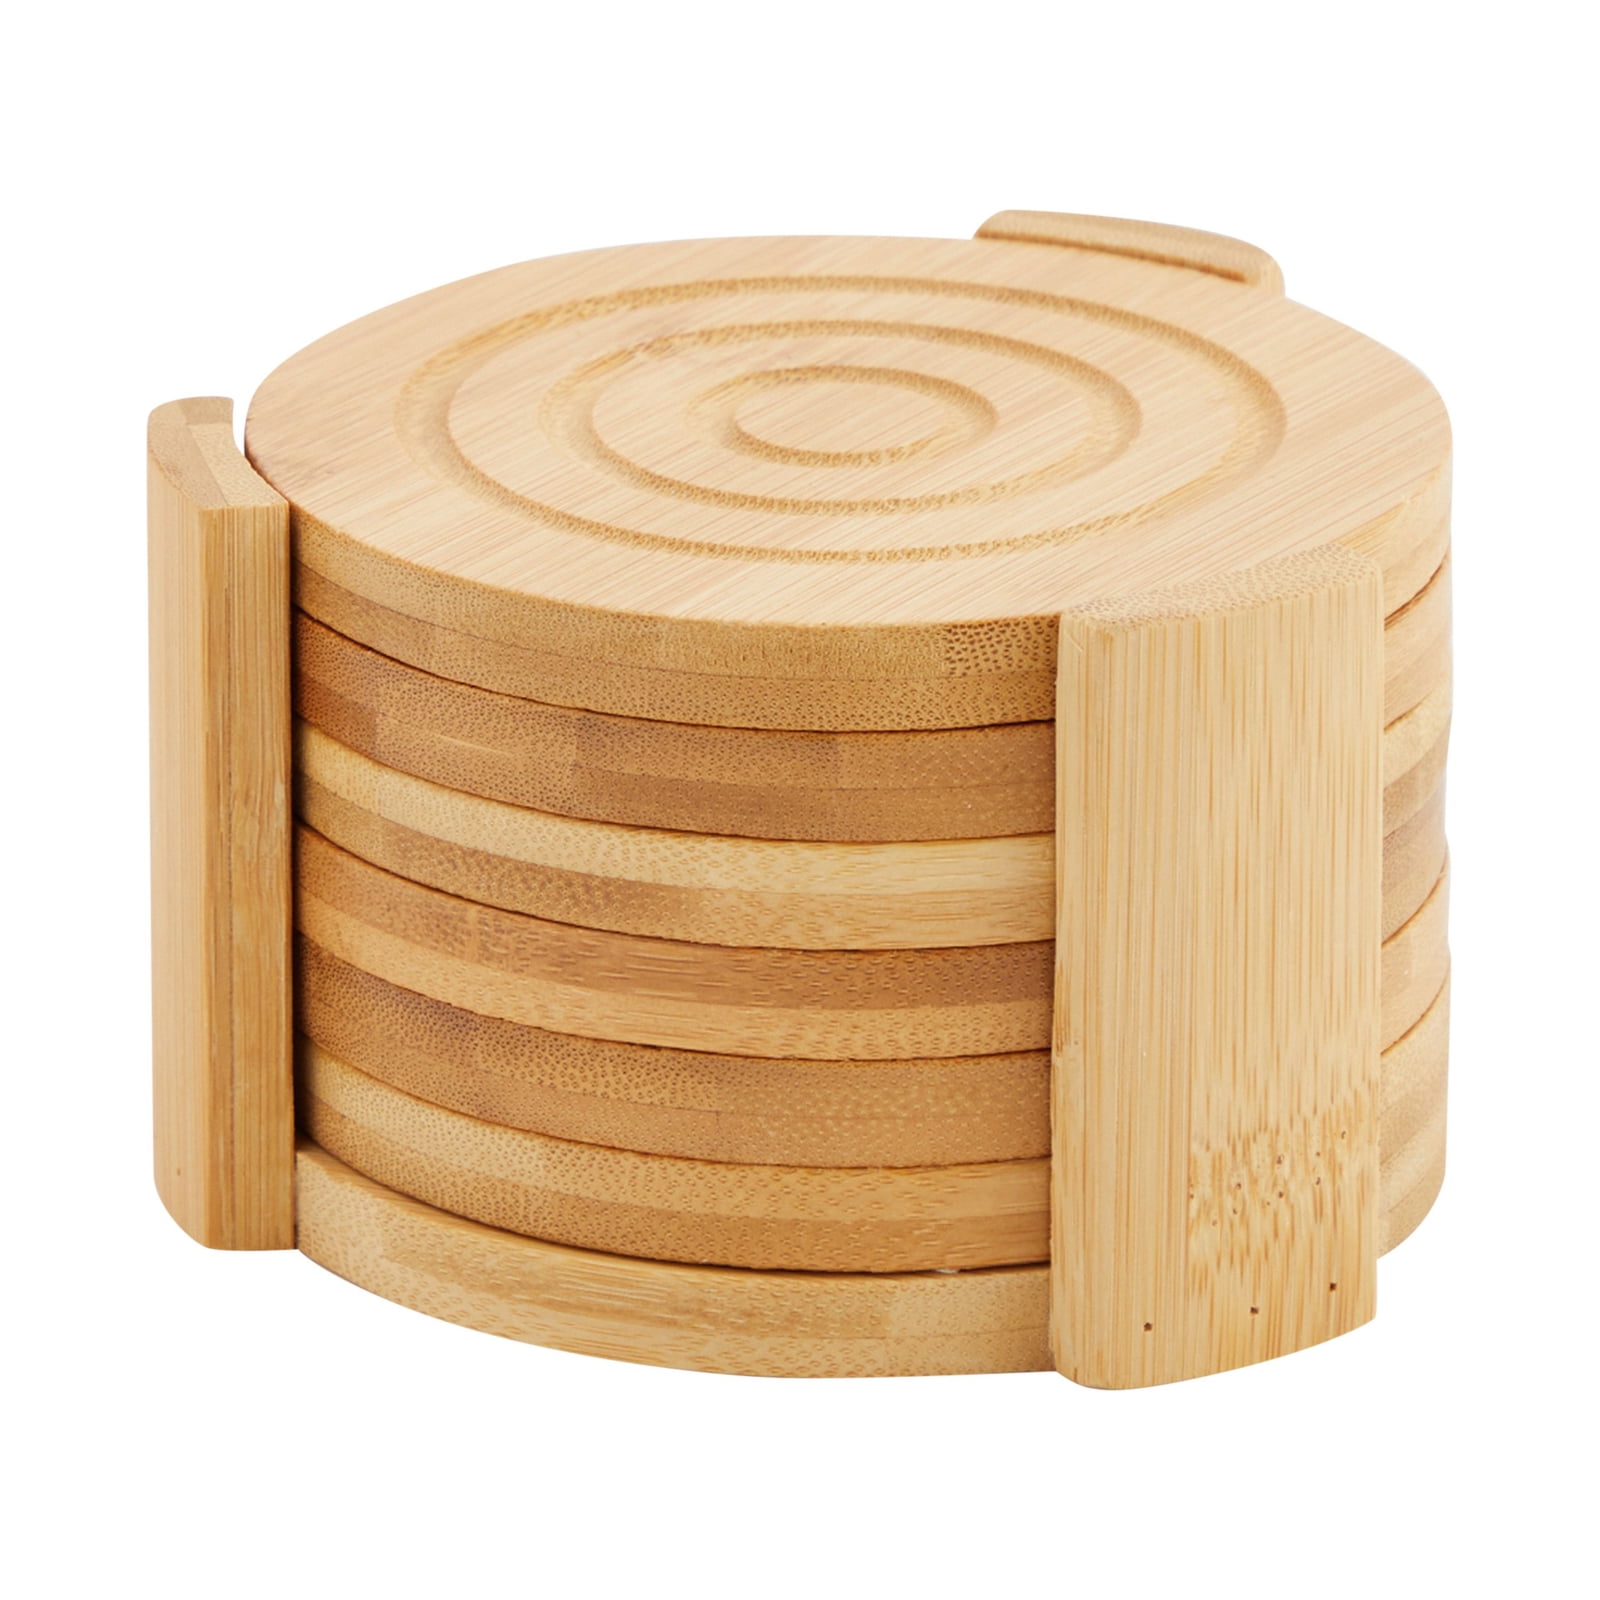 Details about   WOODEN COASTERS SET WITH STORAGE STAND HEVEA RUBBER WOOD HOT CUP MUG MATS 7655 